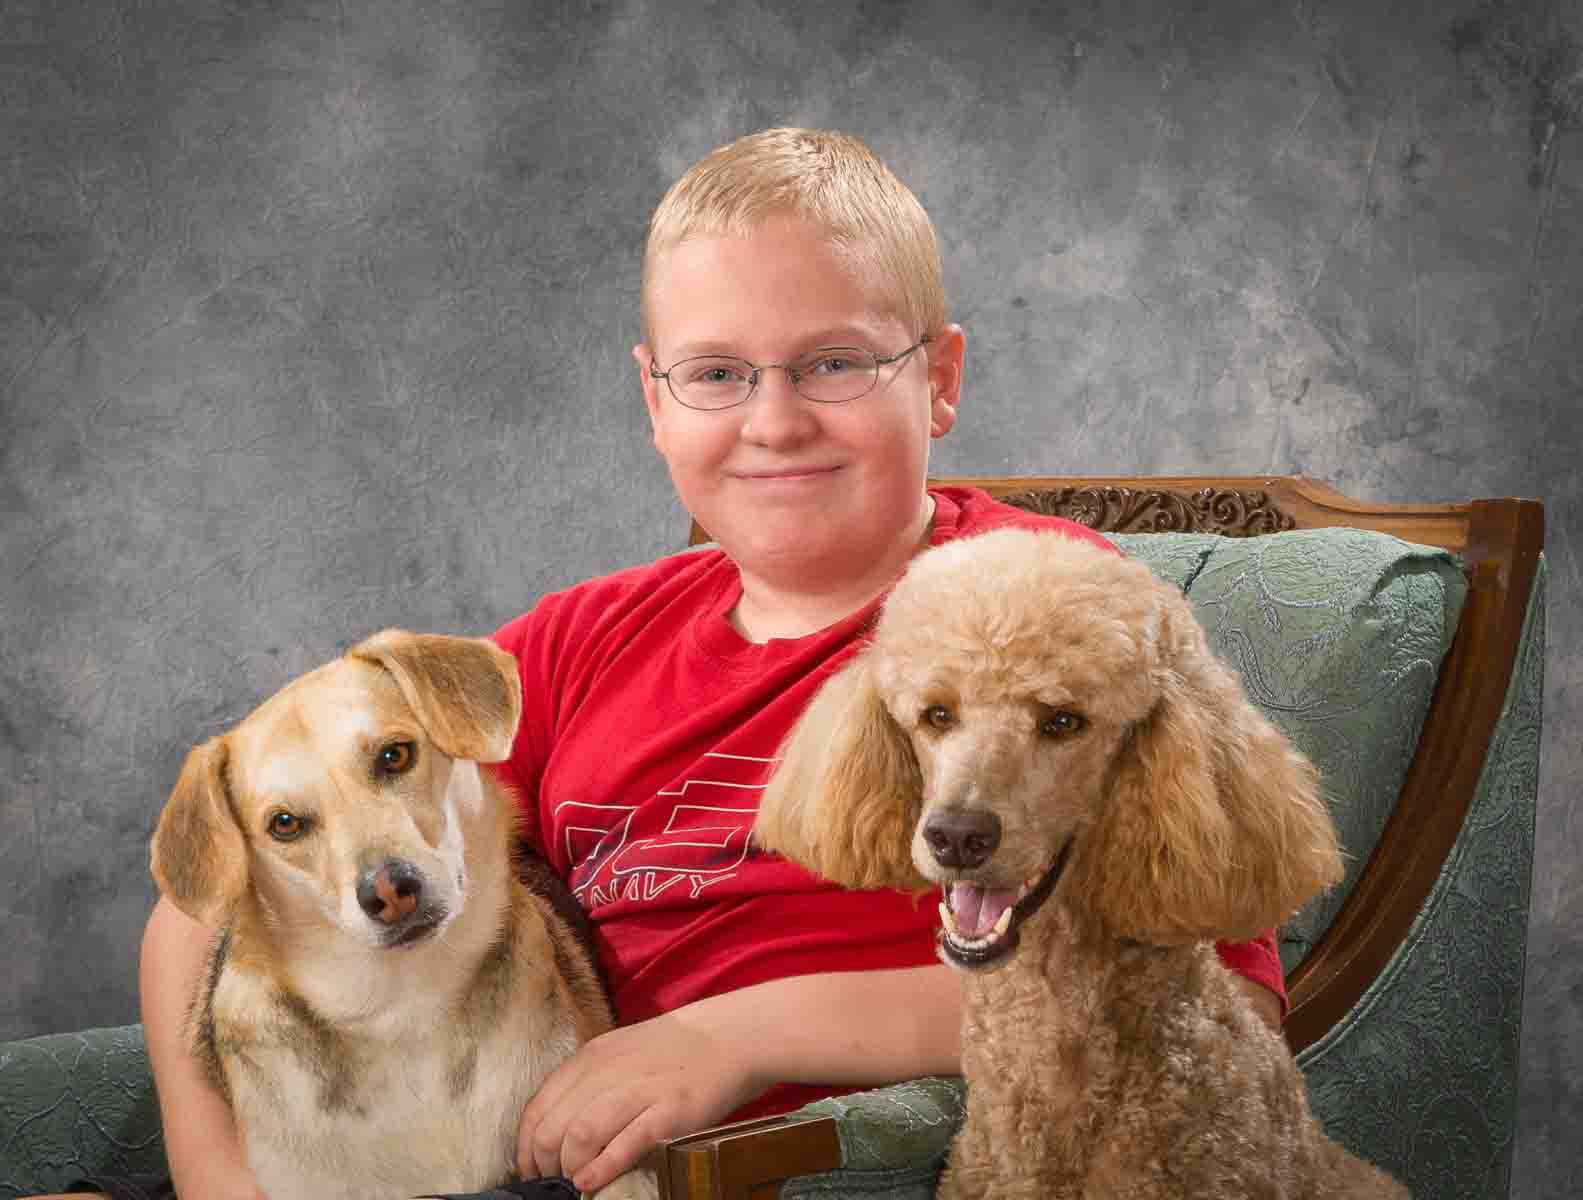 A boy sitting in a chair with two dogs.